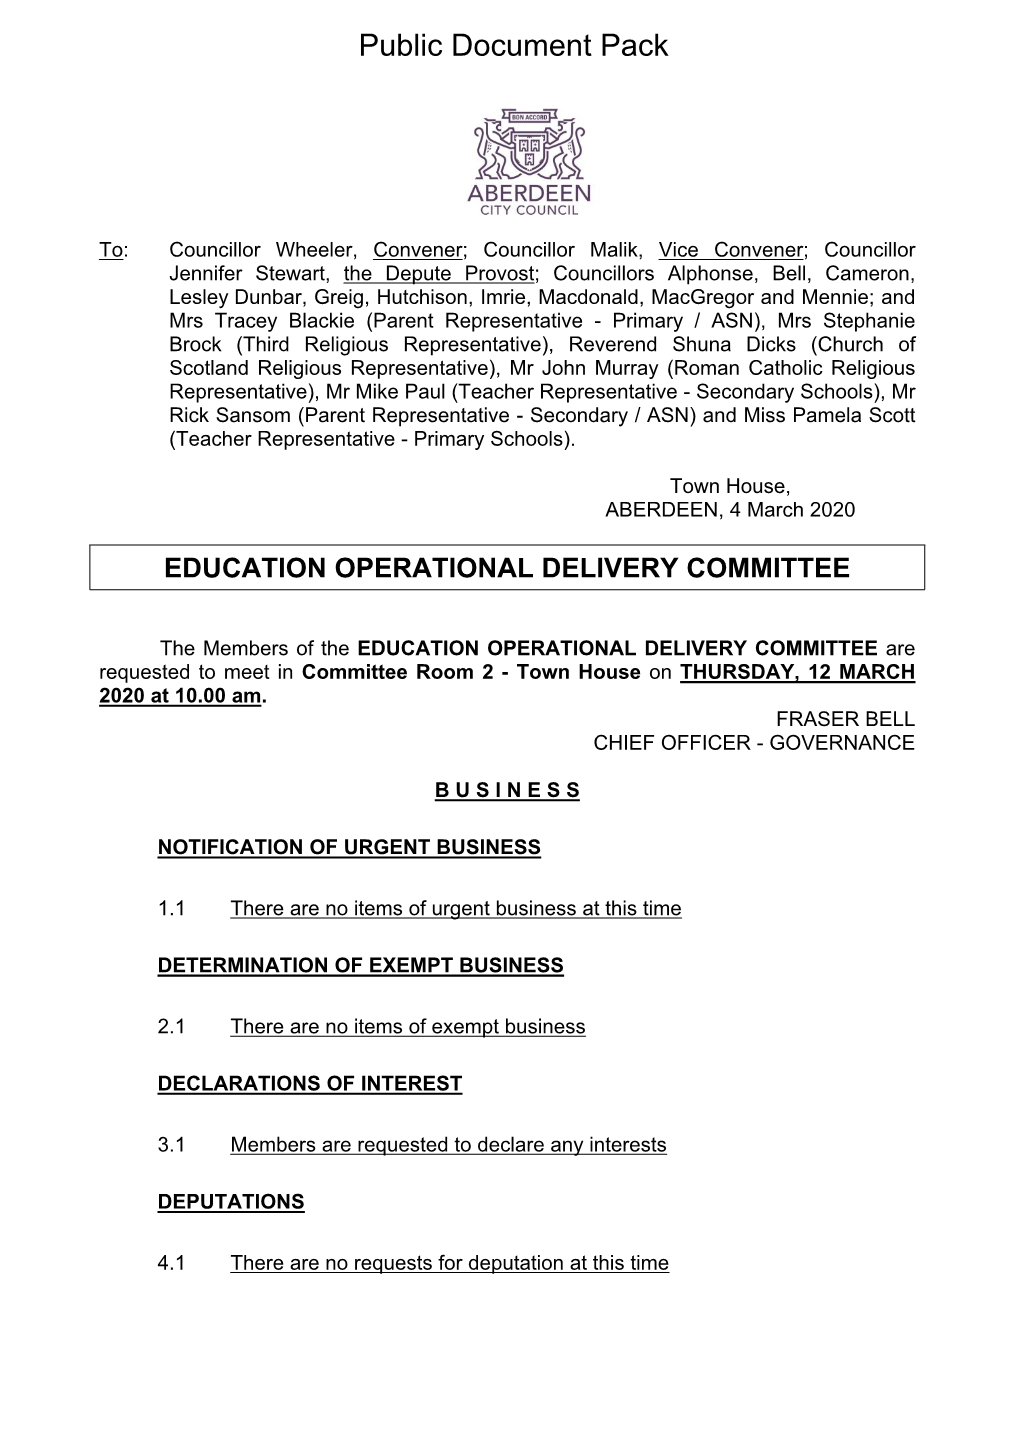 (Public Pack)Agenda Document for Education Operational Delivery